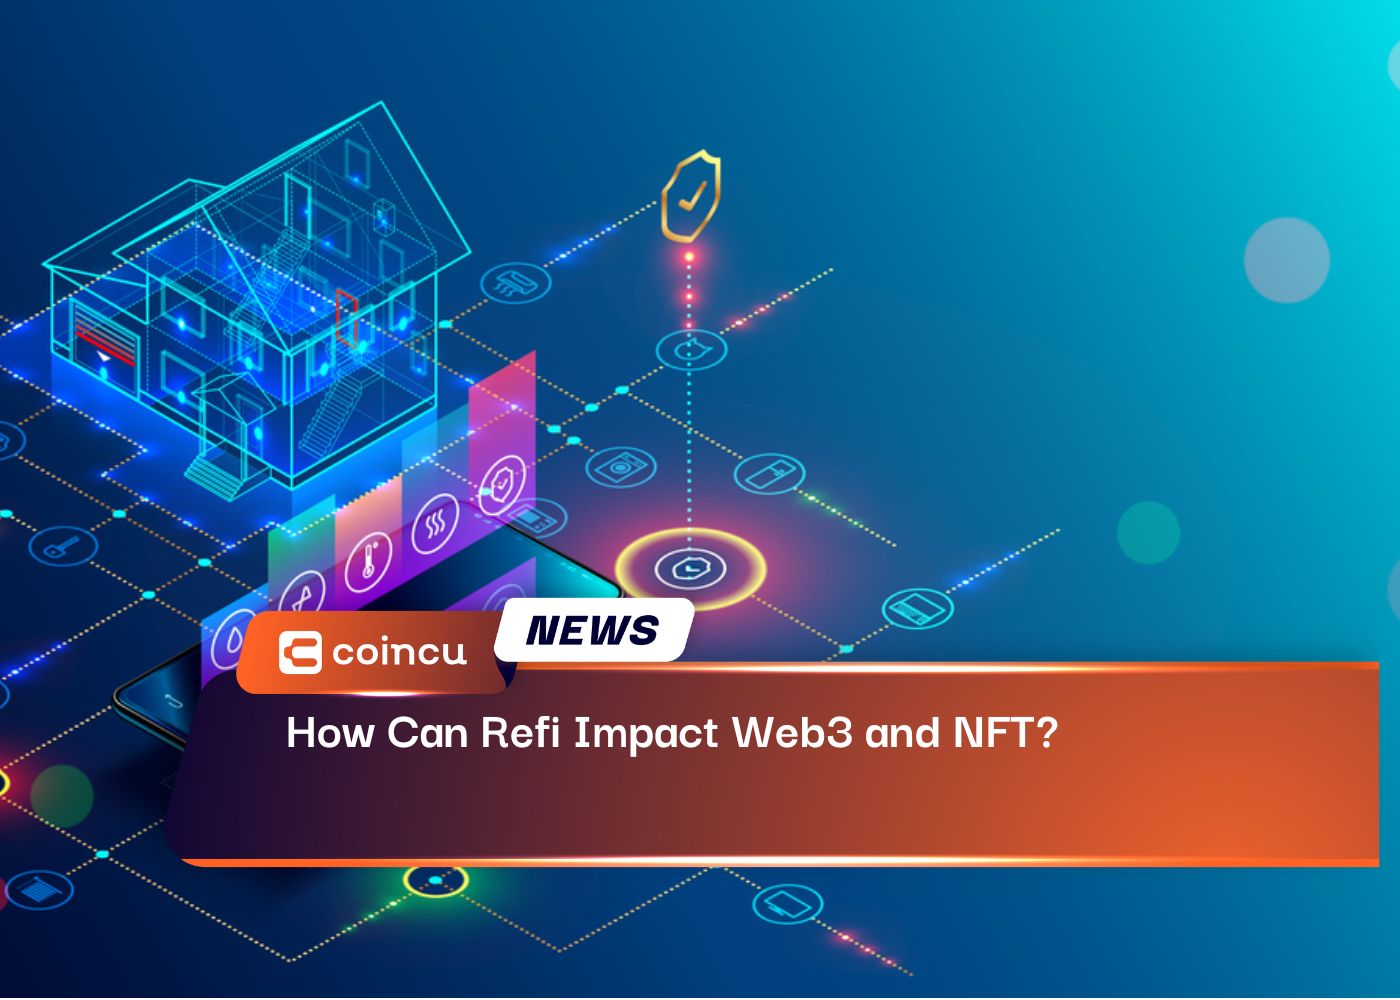 How Can Refi Impact Web3 and NFT?